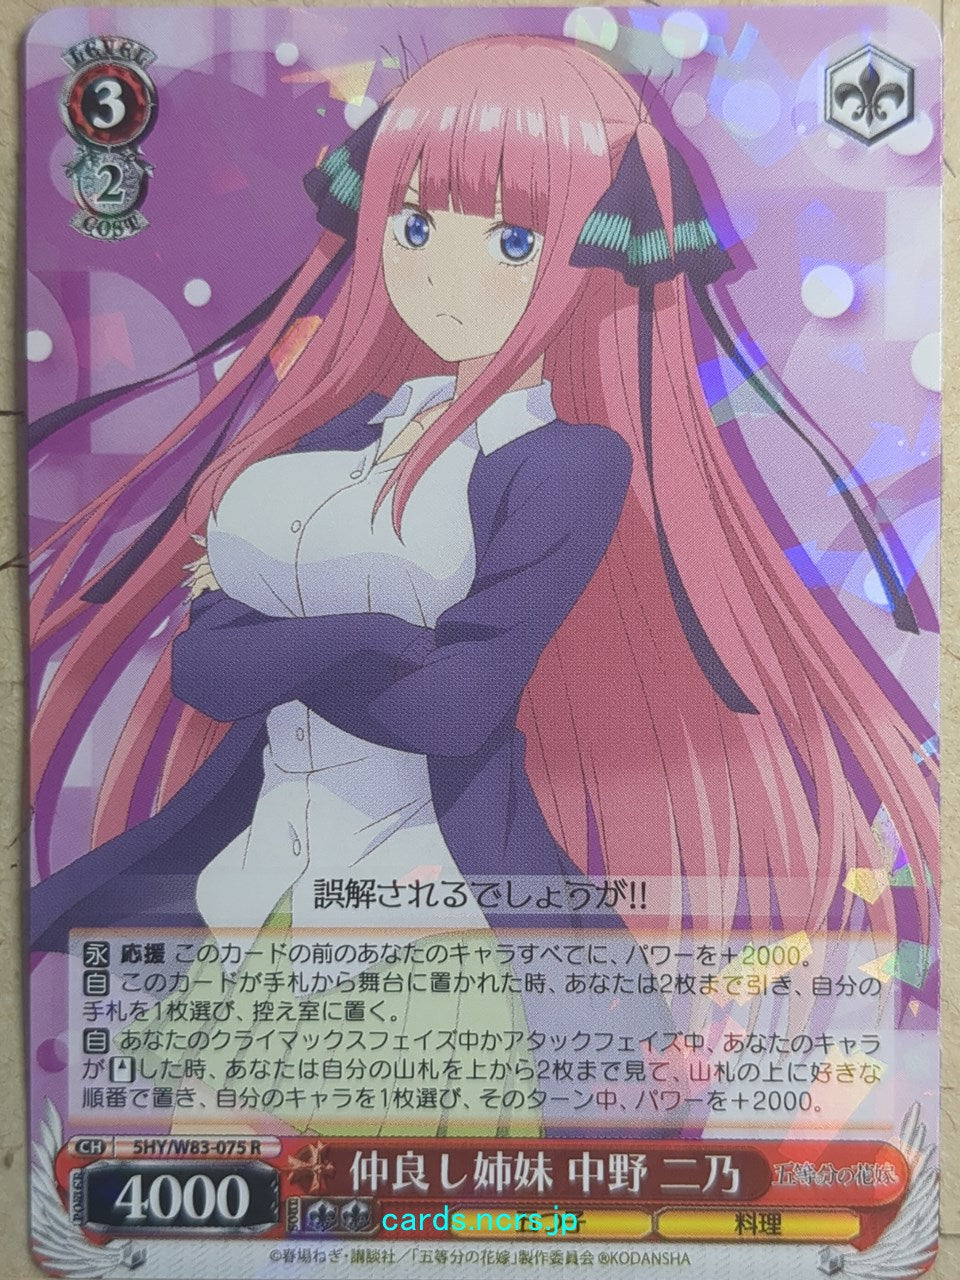 Weiss Schwarz The Quintessential Quintuplets -Nino Nakano-   Trading Card 5HY/W83-075R